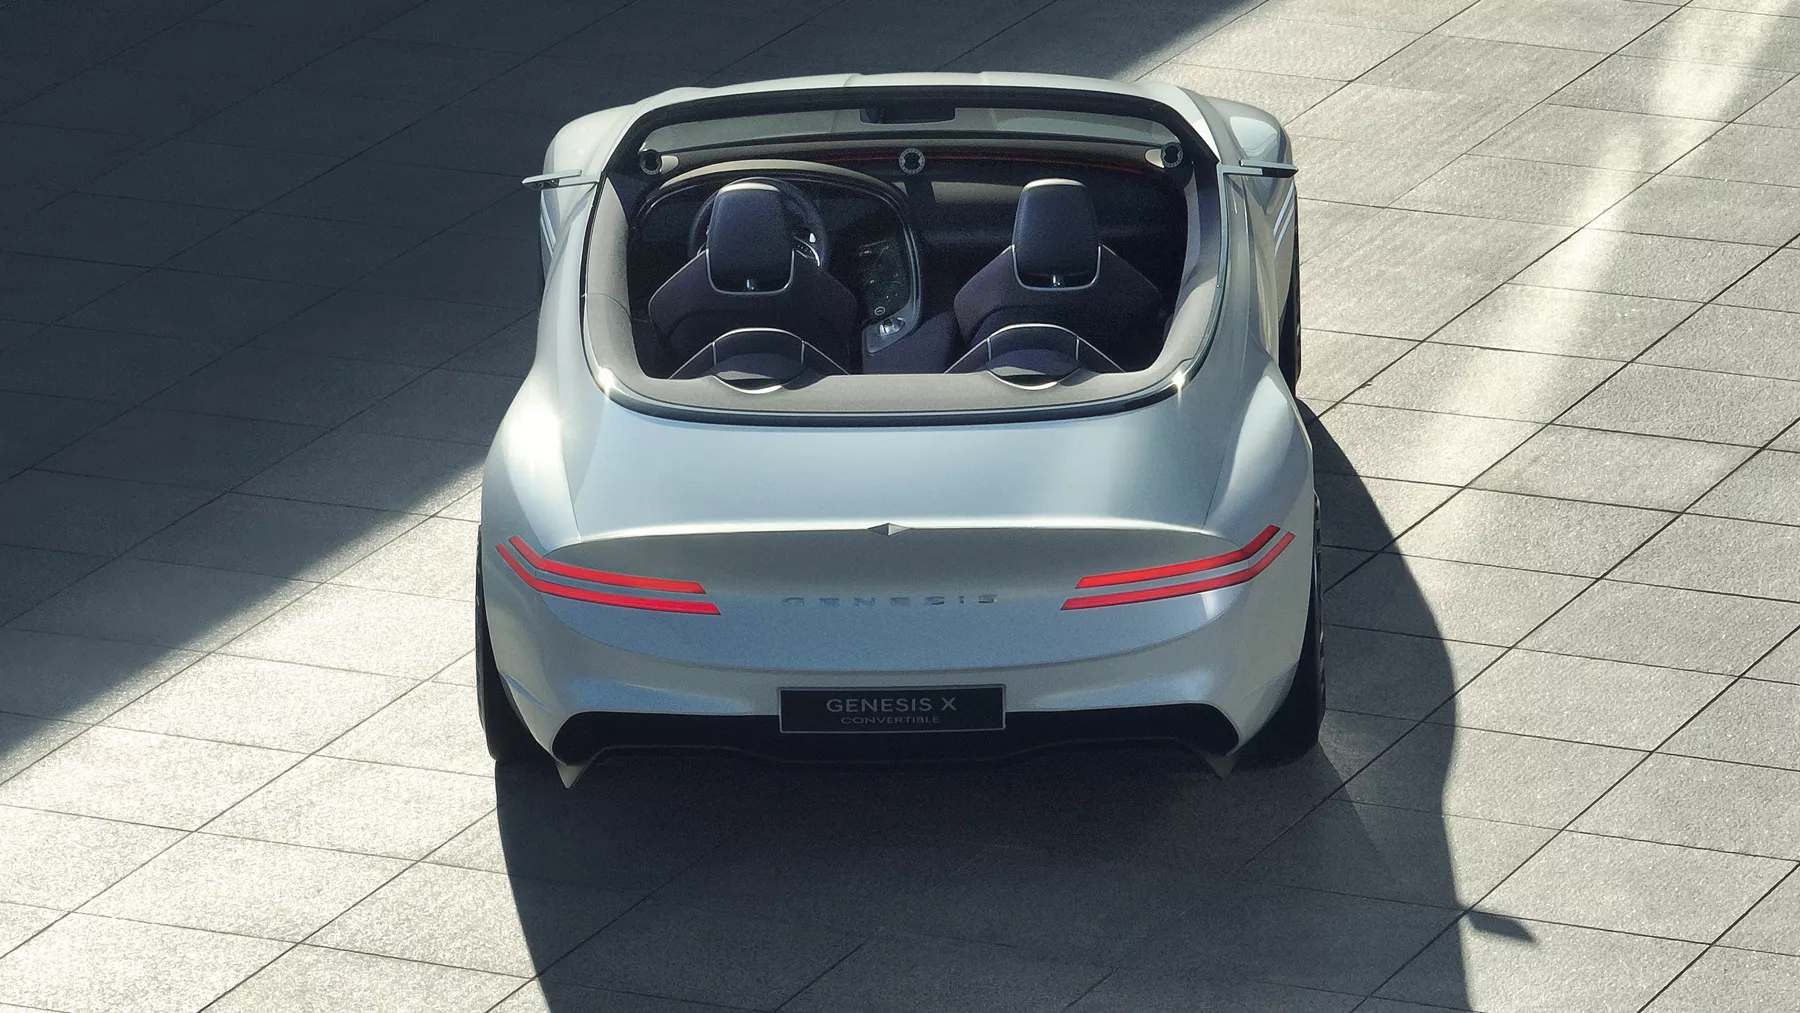 Rear view of X Convertible Concept with taillight illuminated.